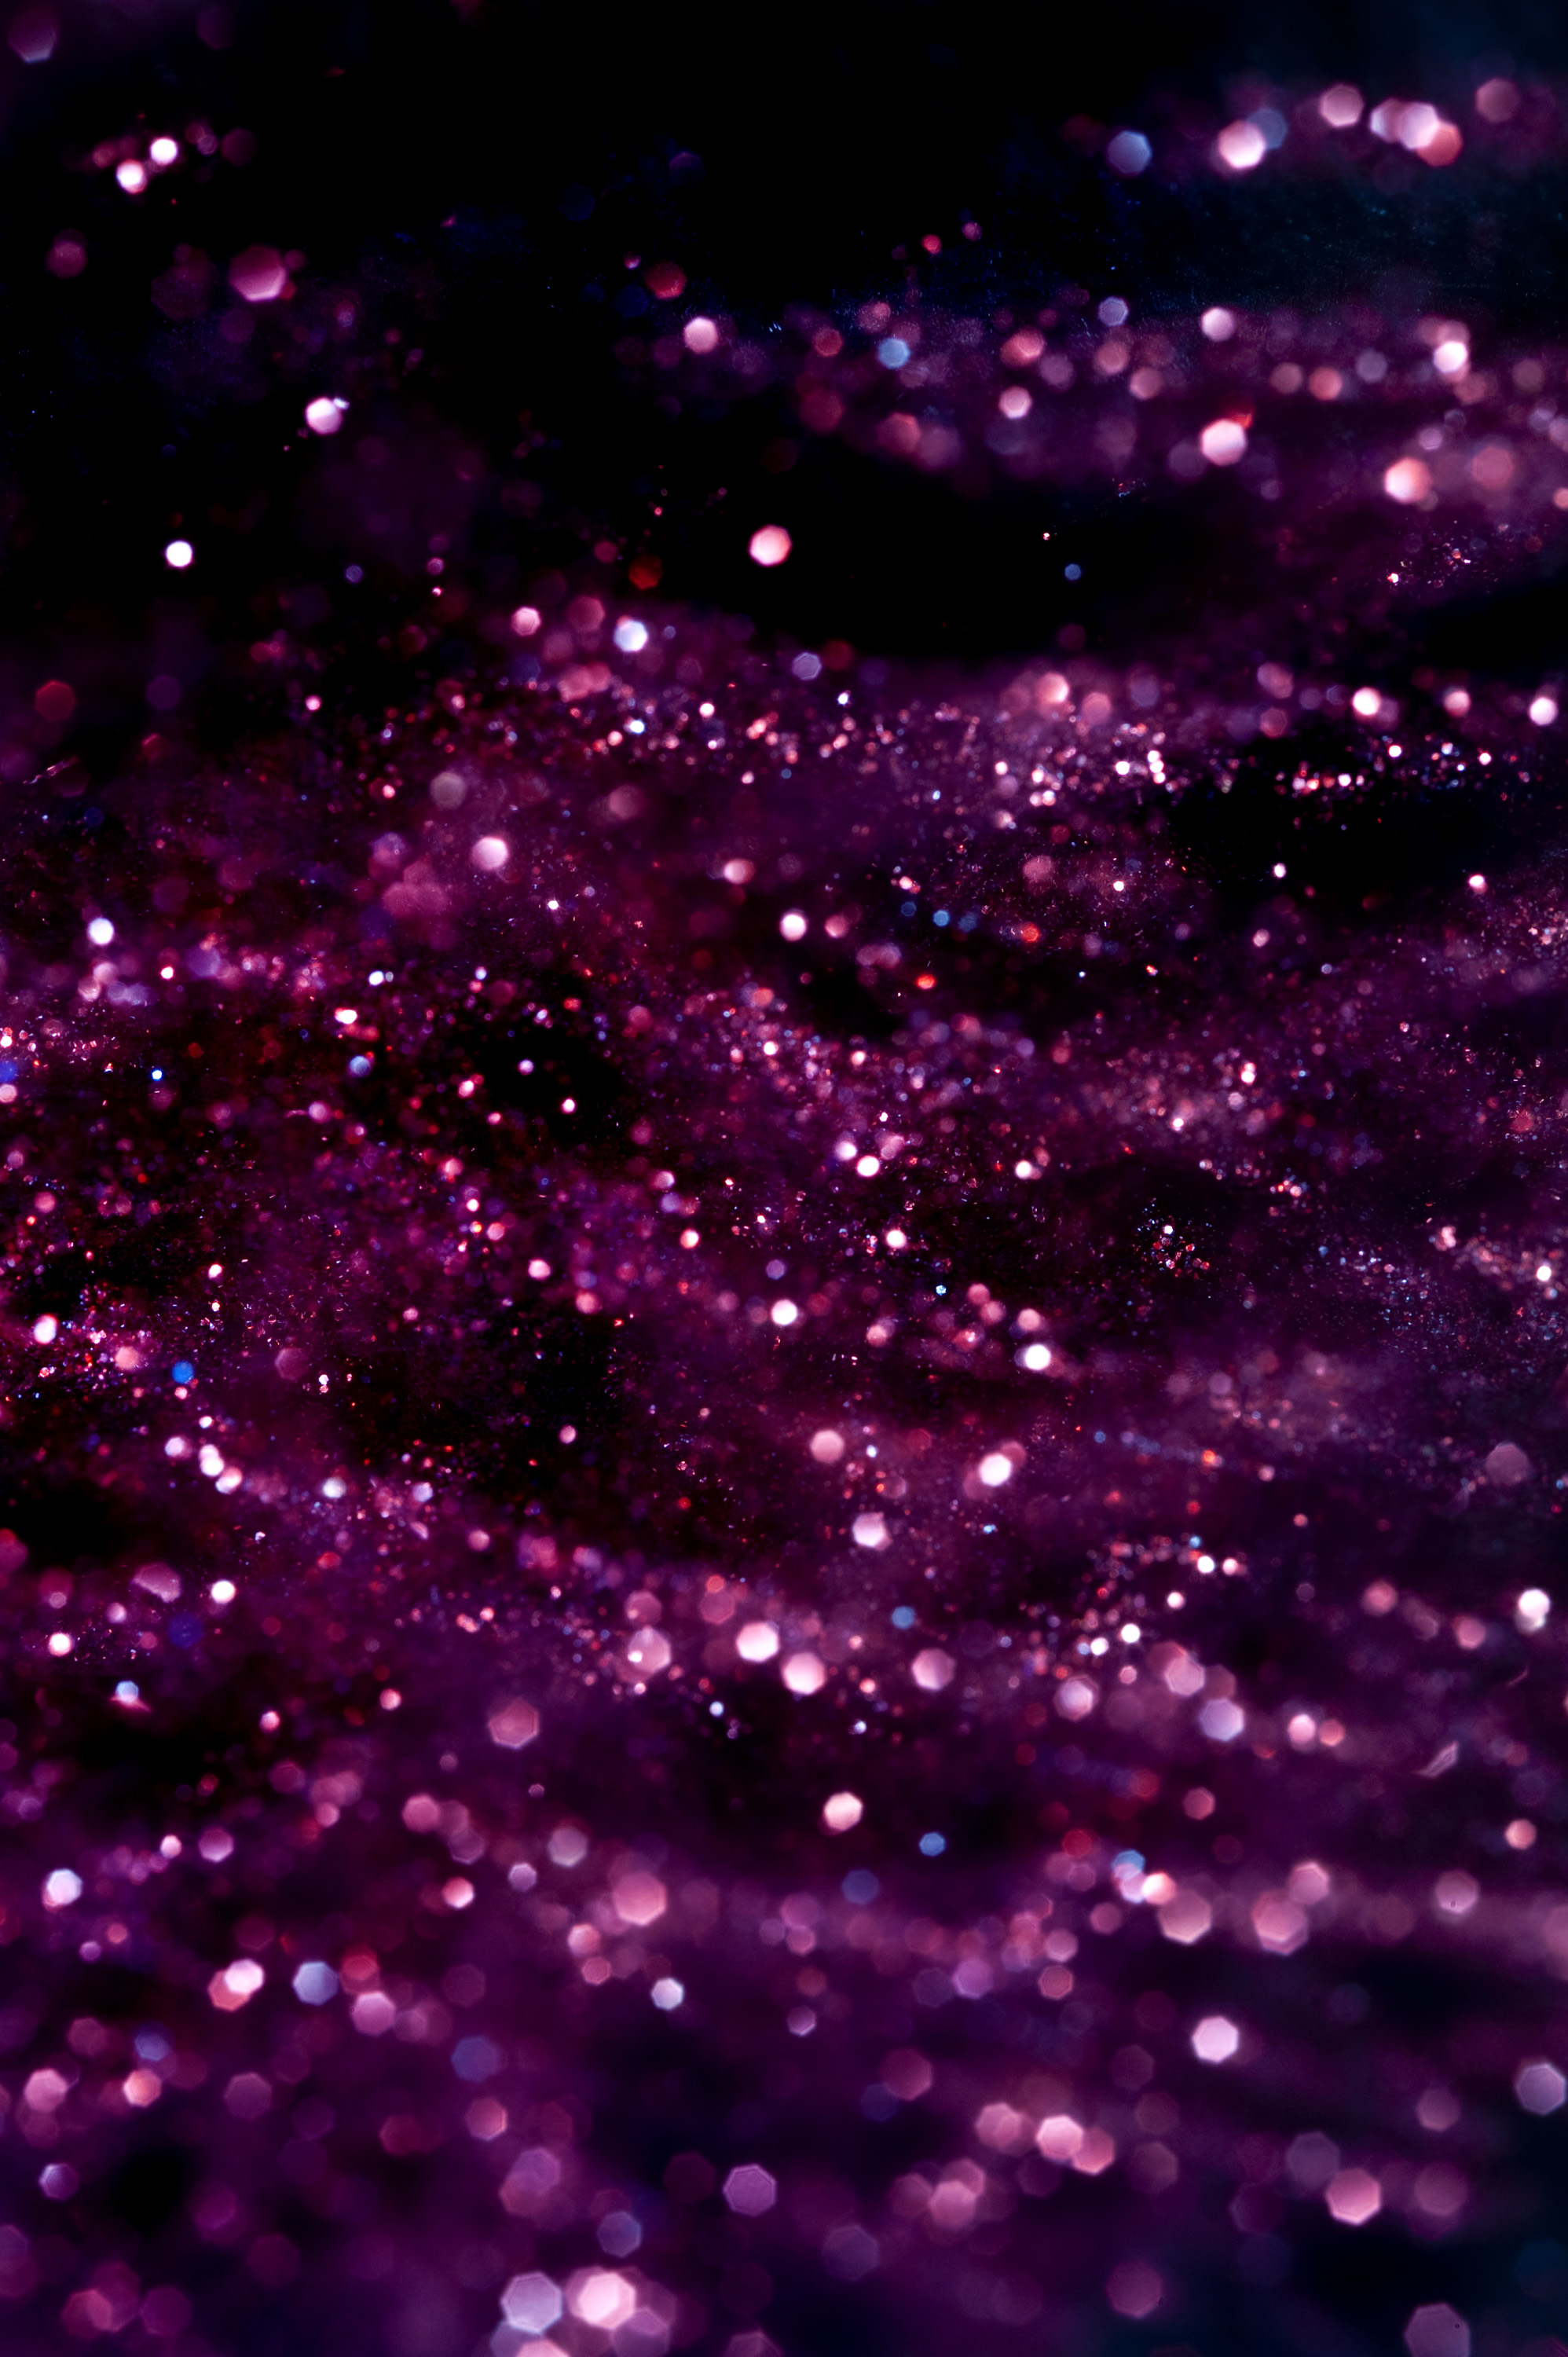 Background Of Defuse Bokeh Highlights And Colorful Glitter Sparkles